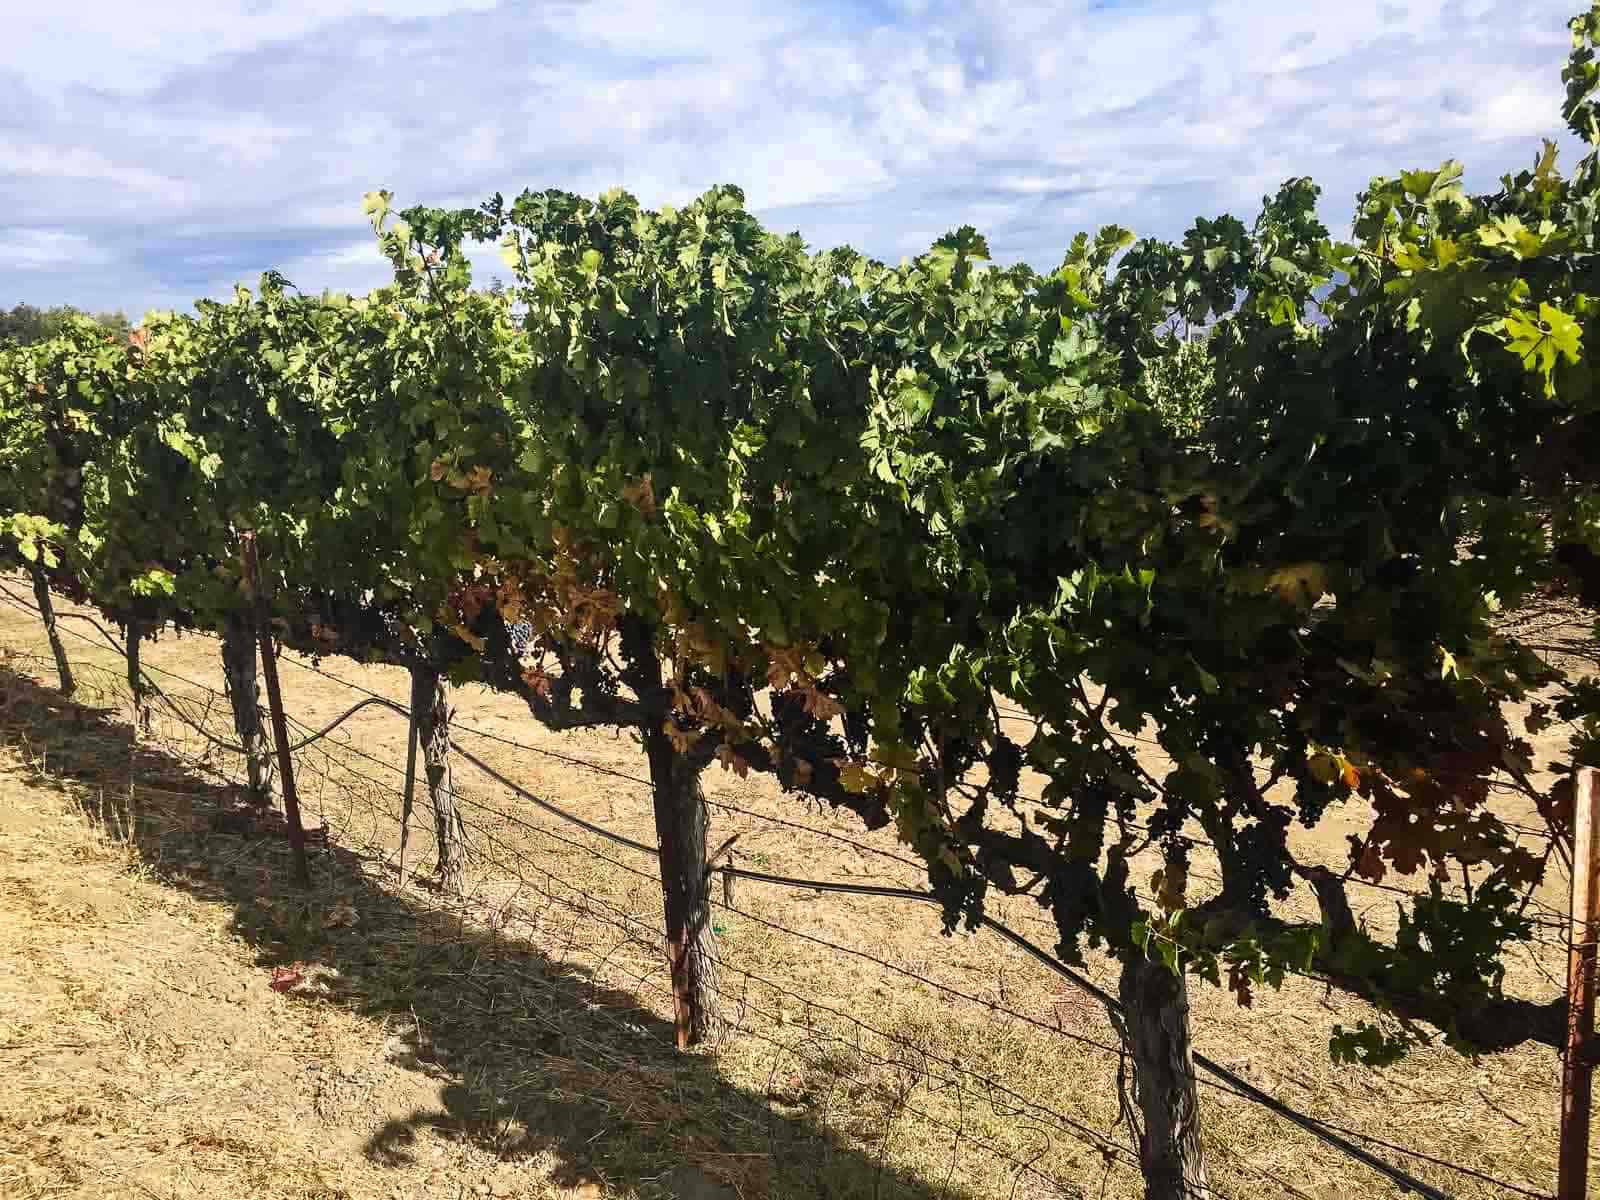 Vineyard in summertime, with green leaves, purple grapes, dry grass, and blue skies. 